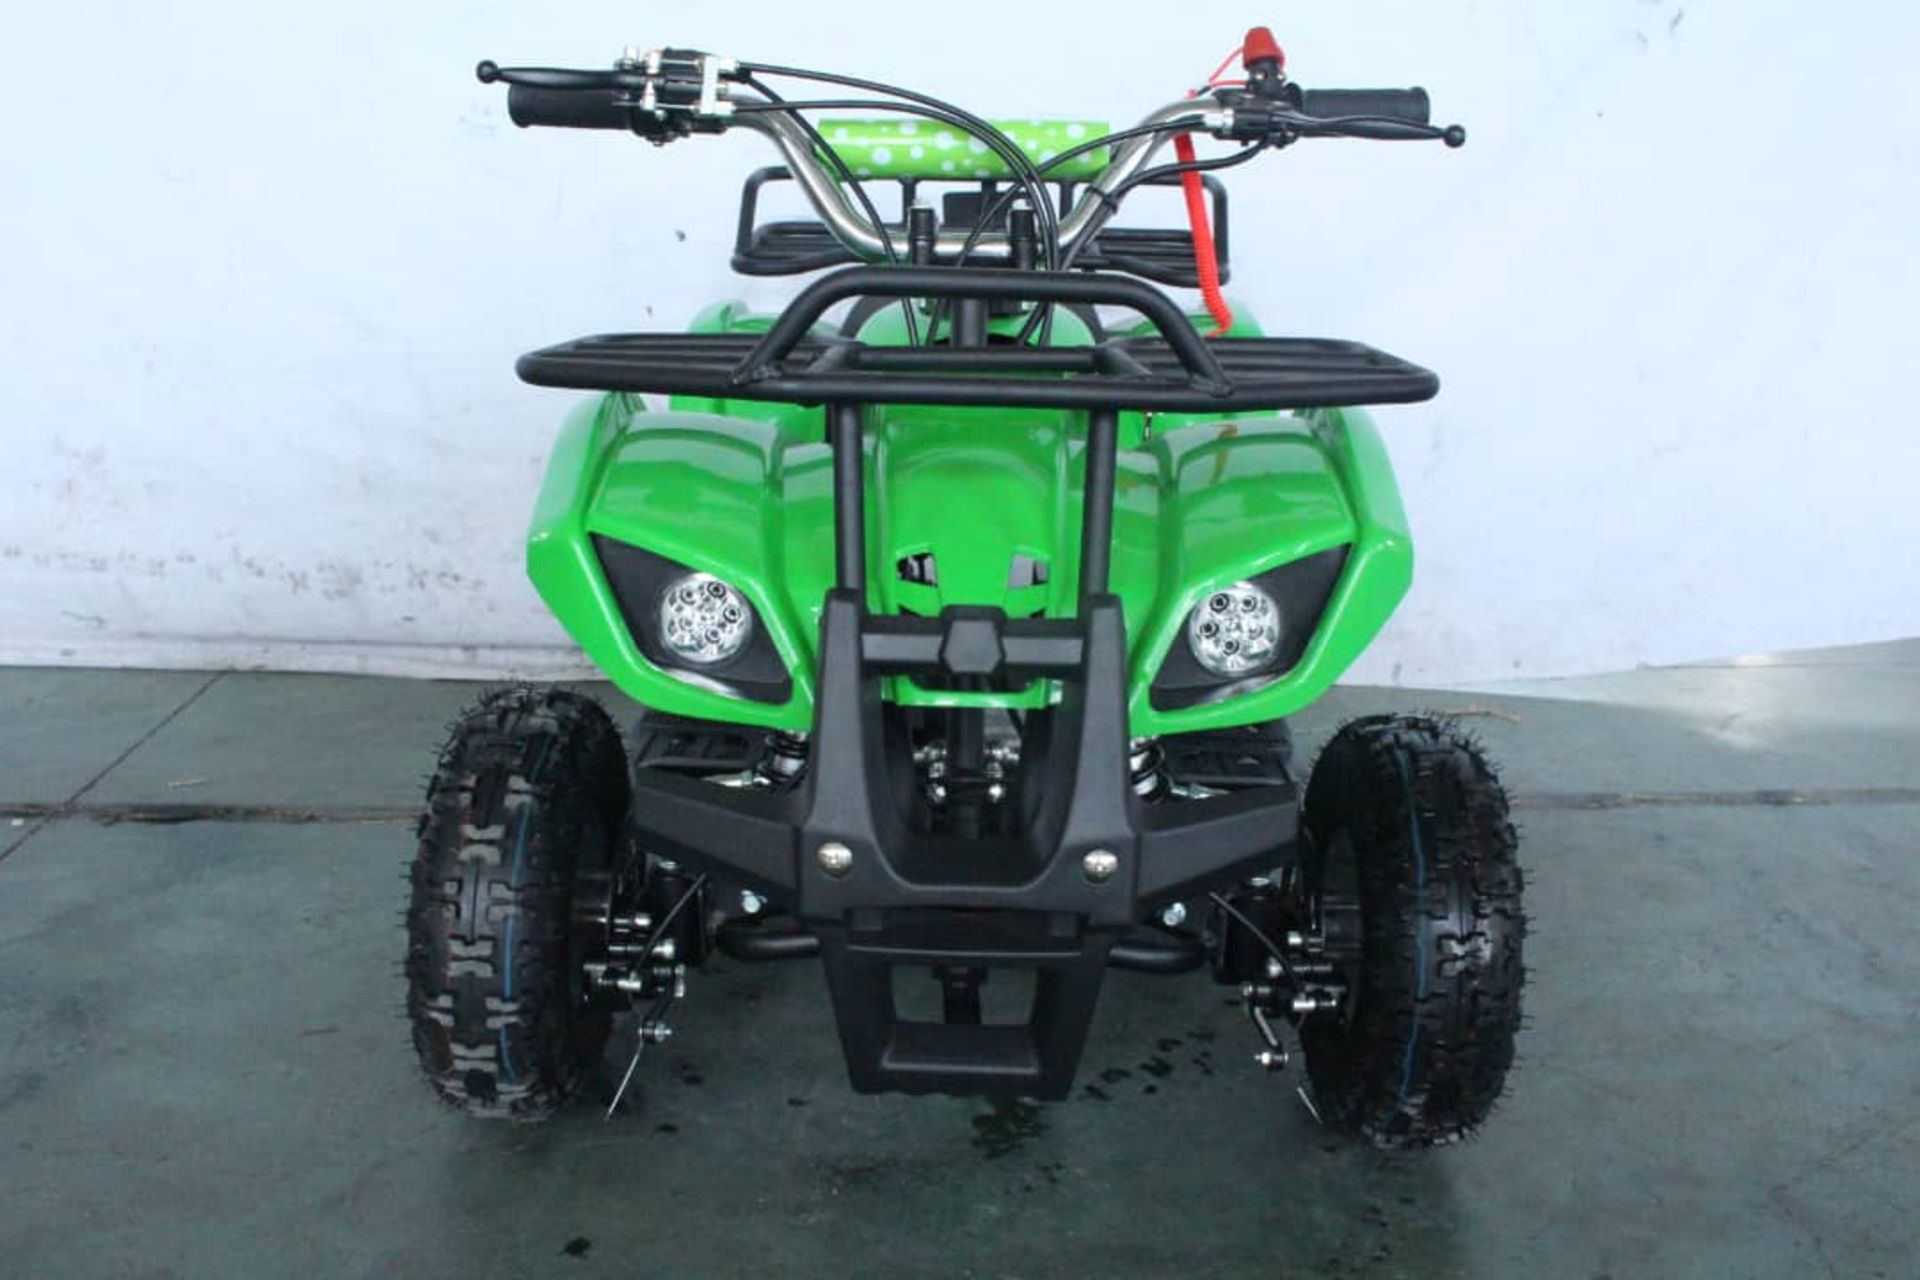 + VAT Brand New 50cc Mini Quad Bike FRM - Colours May Vary - Picture May Vary From Actual Item - Image 8 of 9